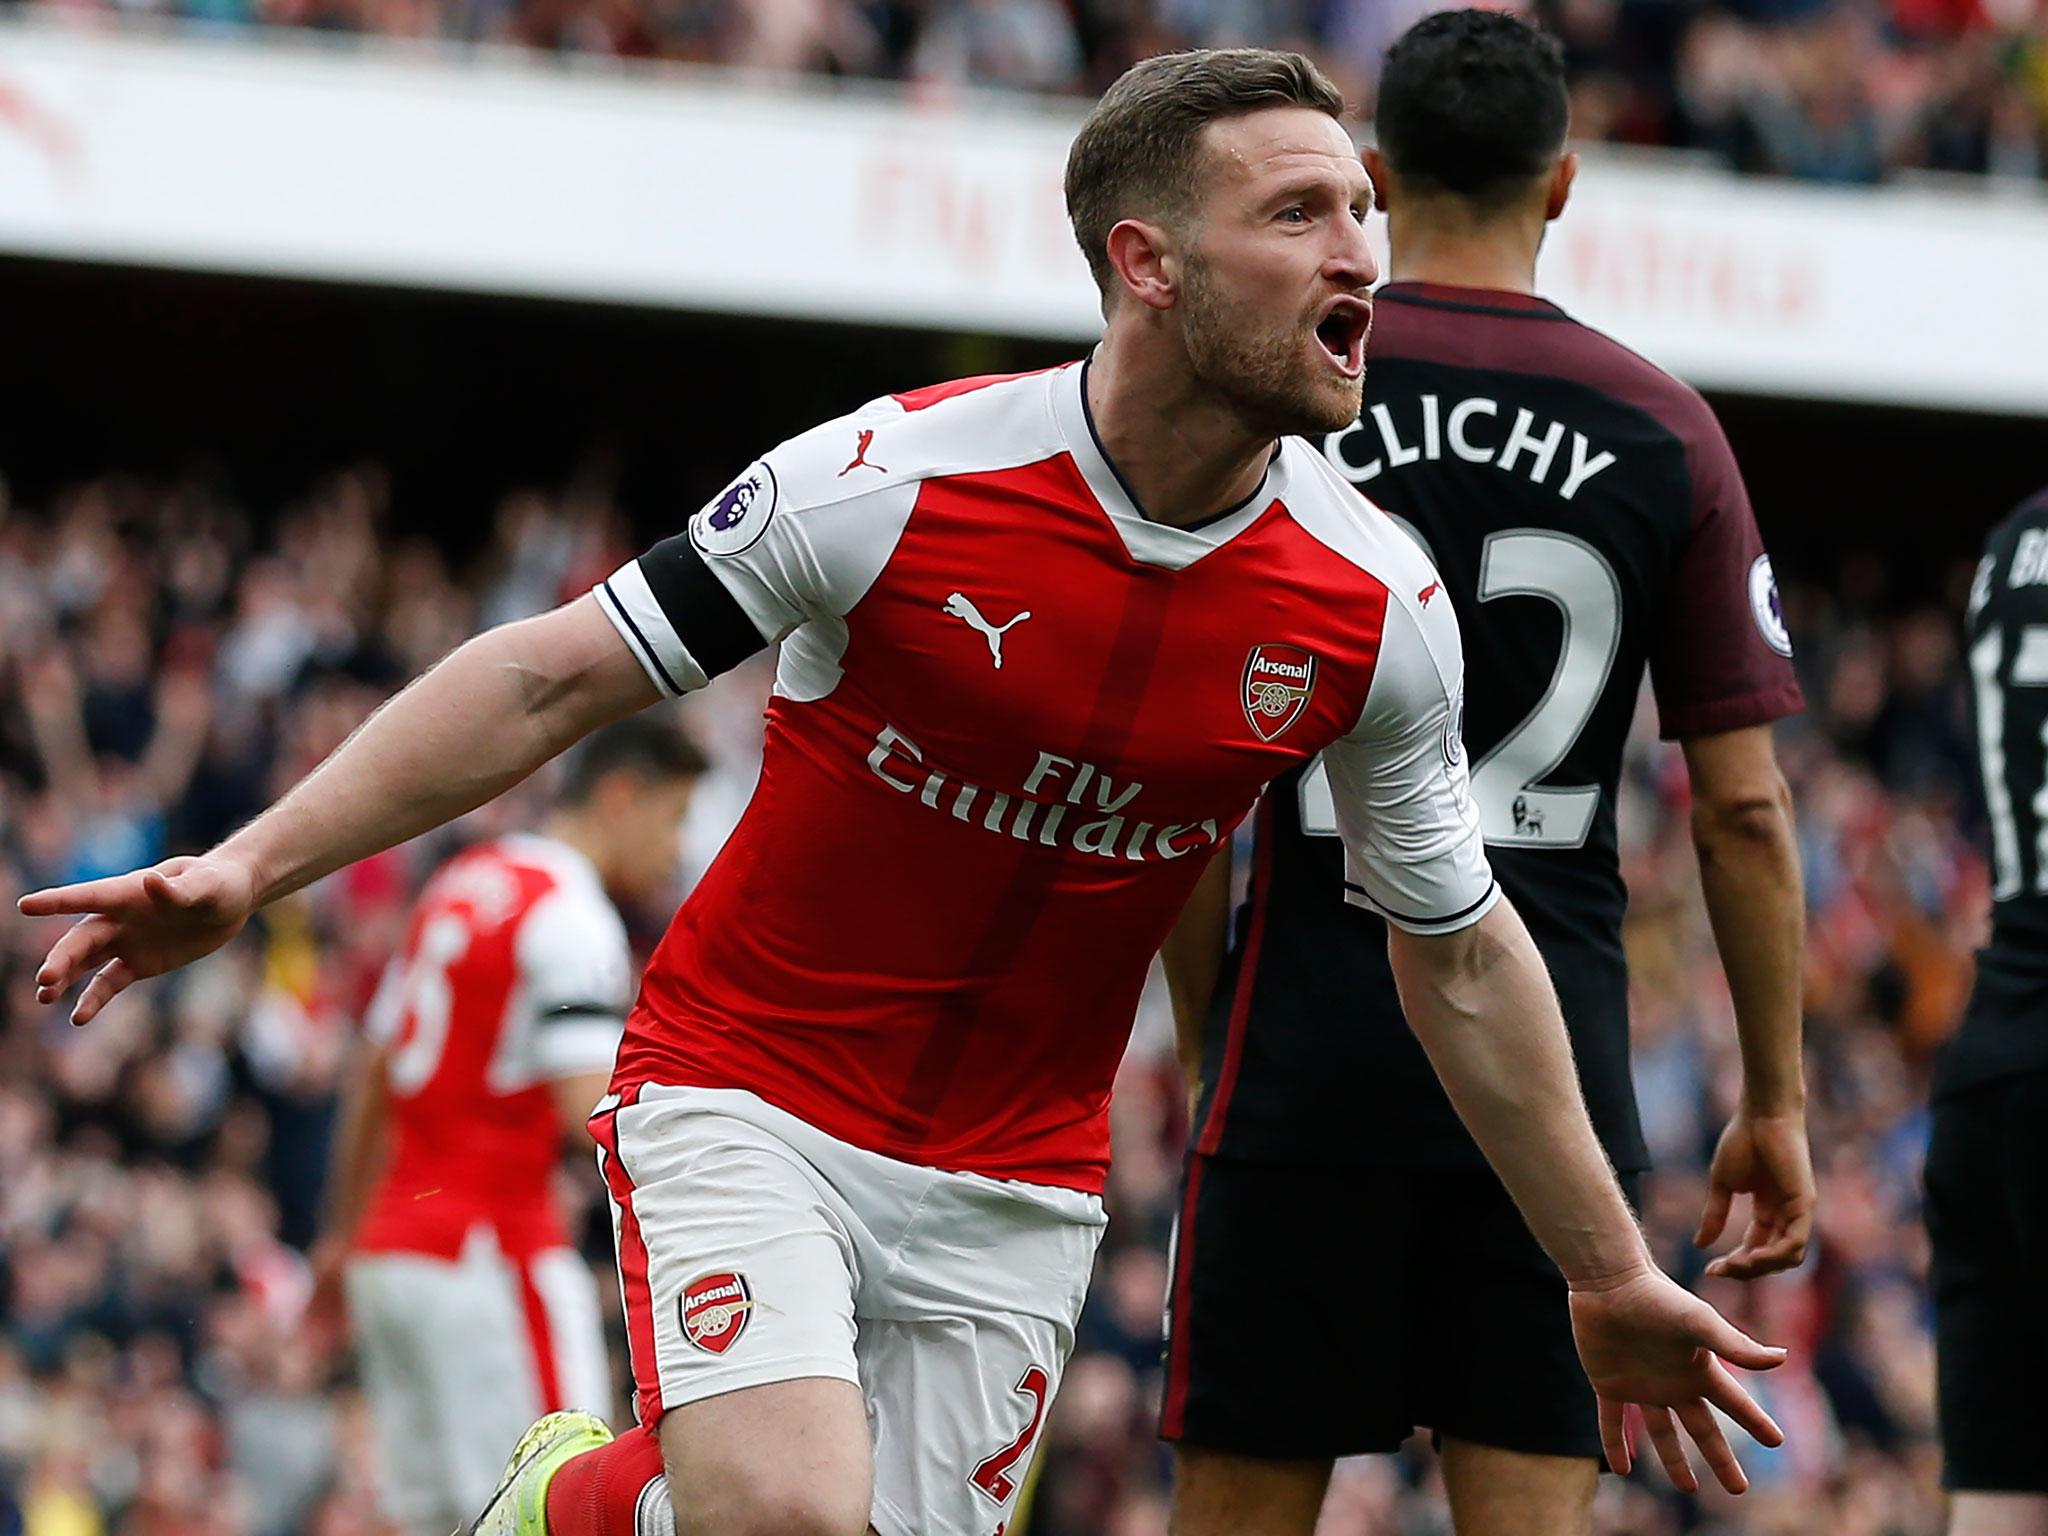 Arsenal's German defender Shkodran Mustafi celebrates after scoring their second goal during the English Premier League football match between Arsenal and Manchester City at The Emirates